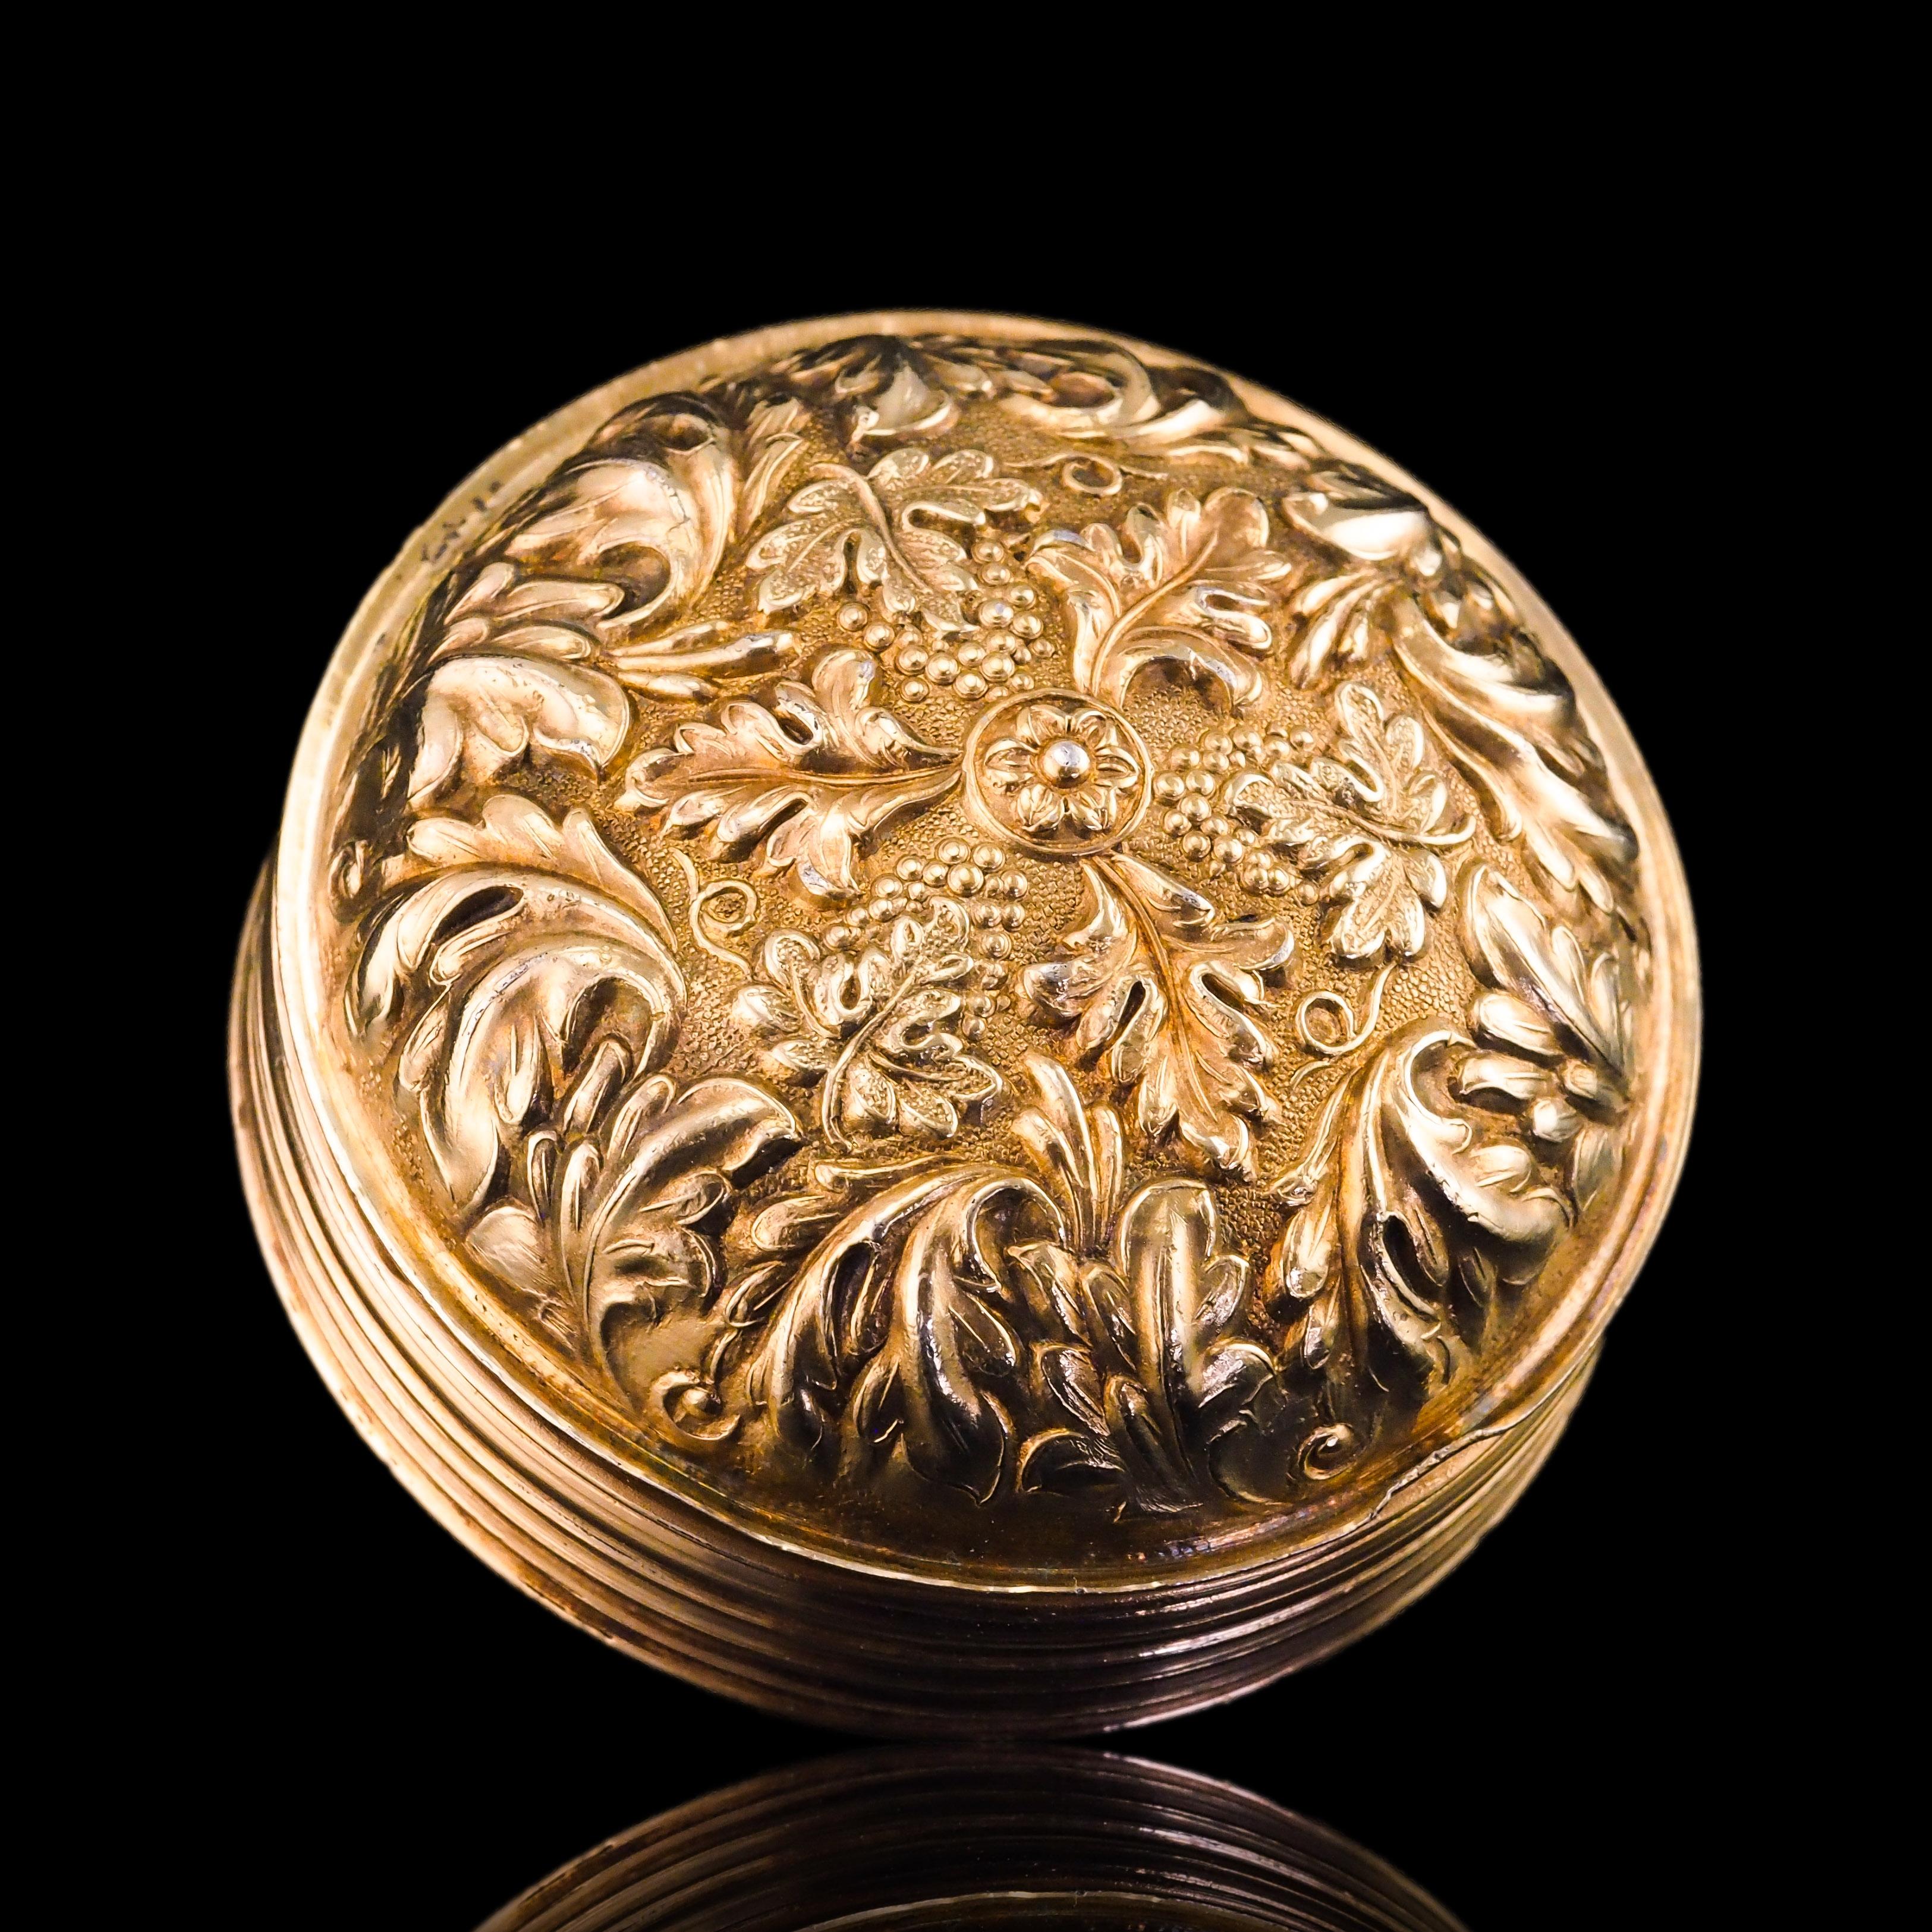 Antique English Georgian Spherical/Circular Silver Gilt Snuff Box  - 1823 In Good Condition For Sale In London, GB